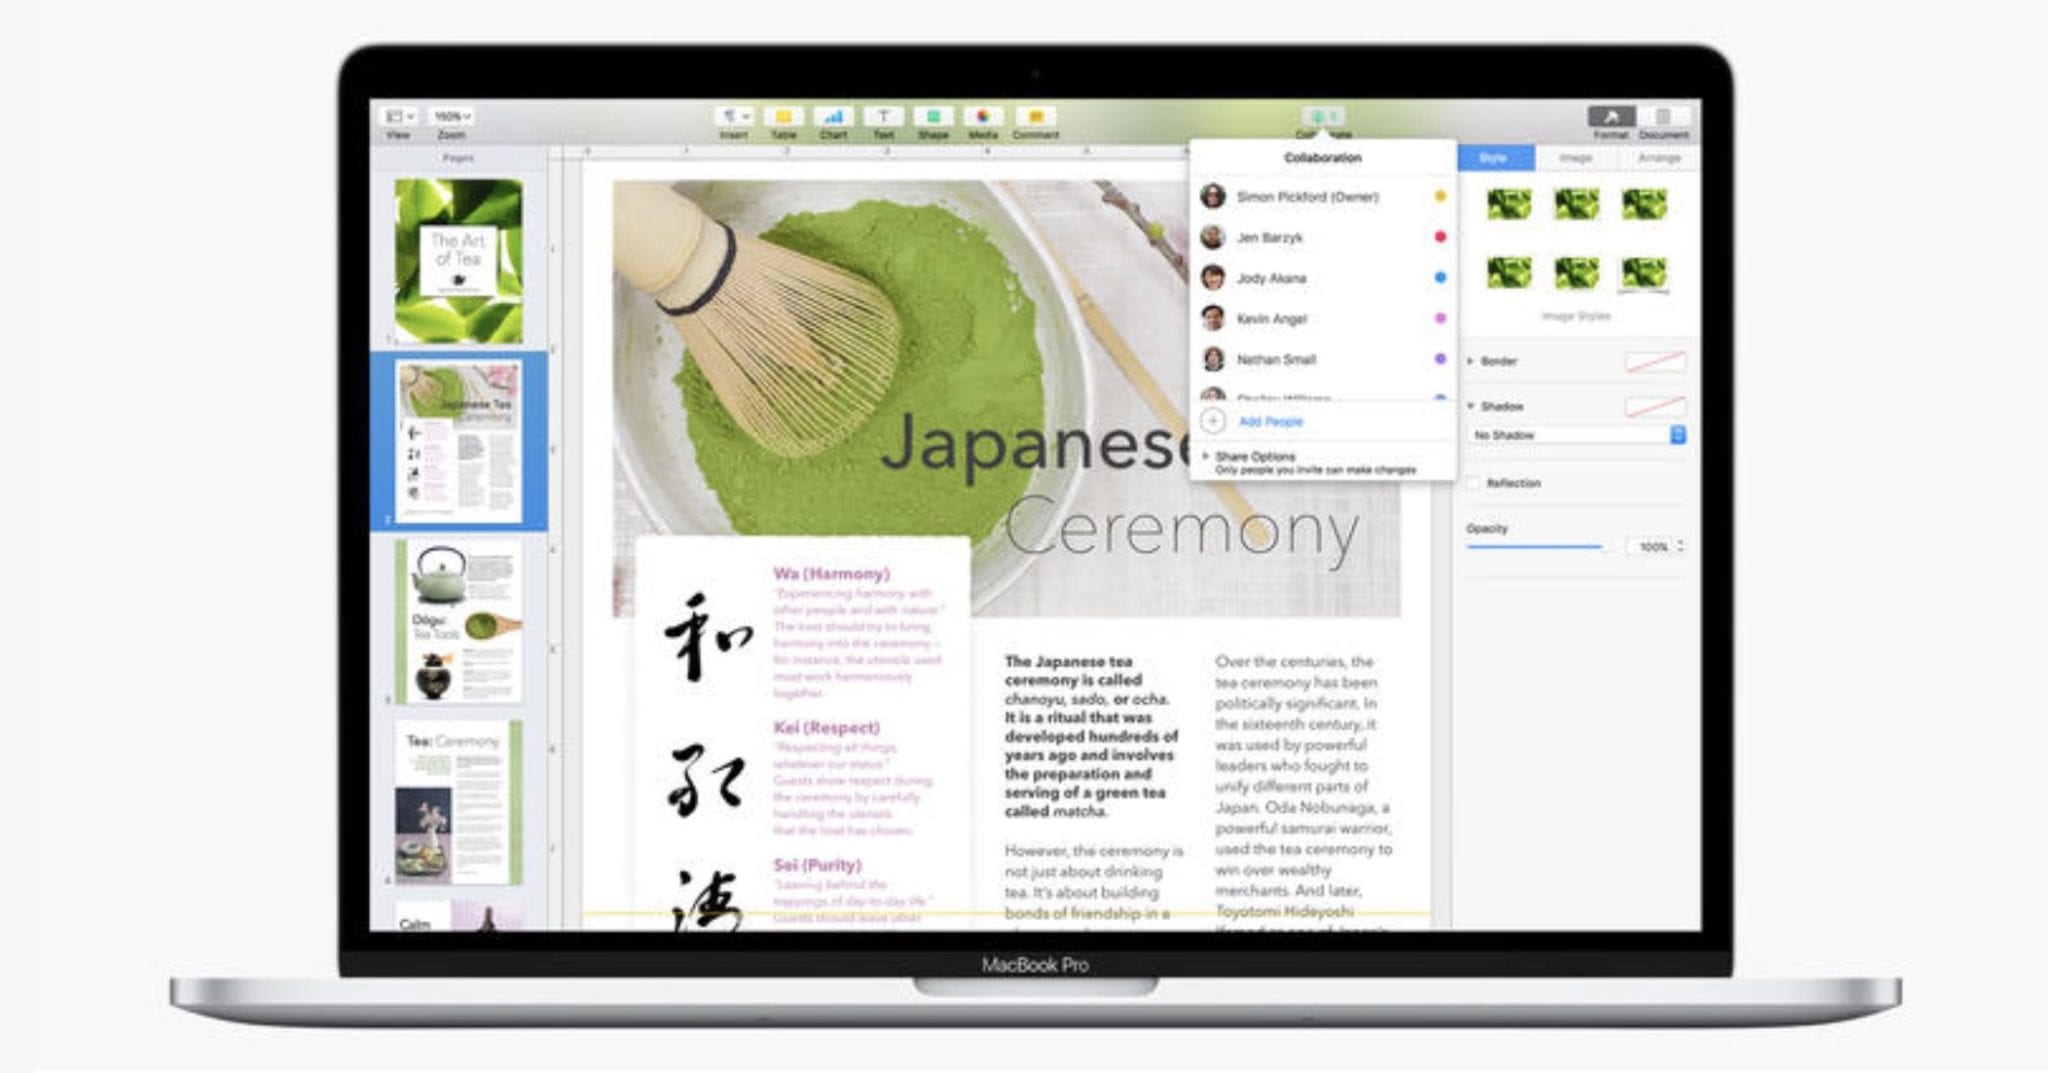 iWork Pages